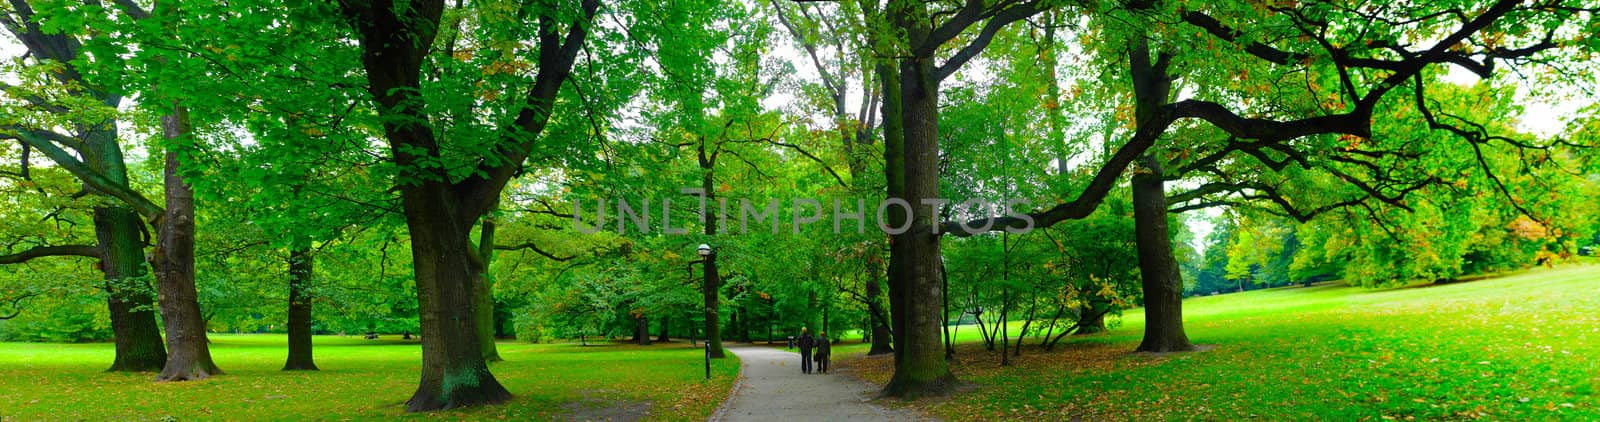 Park in autumn time - panoramic view